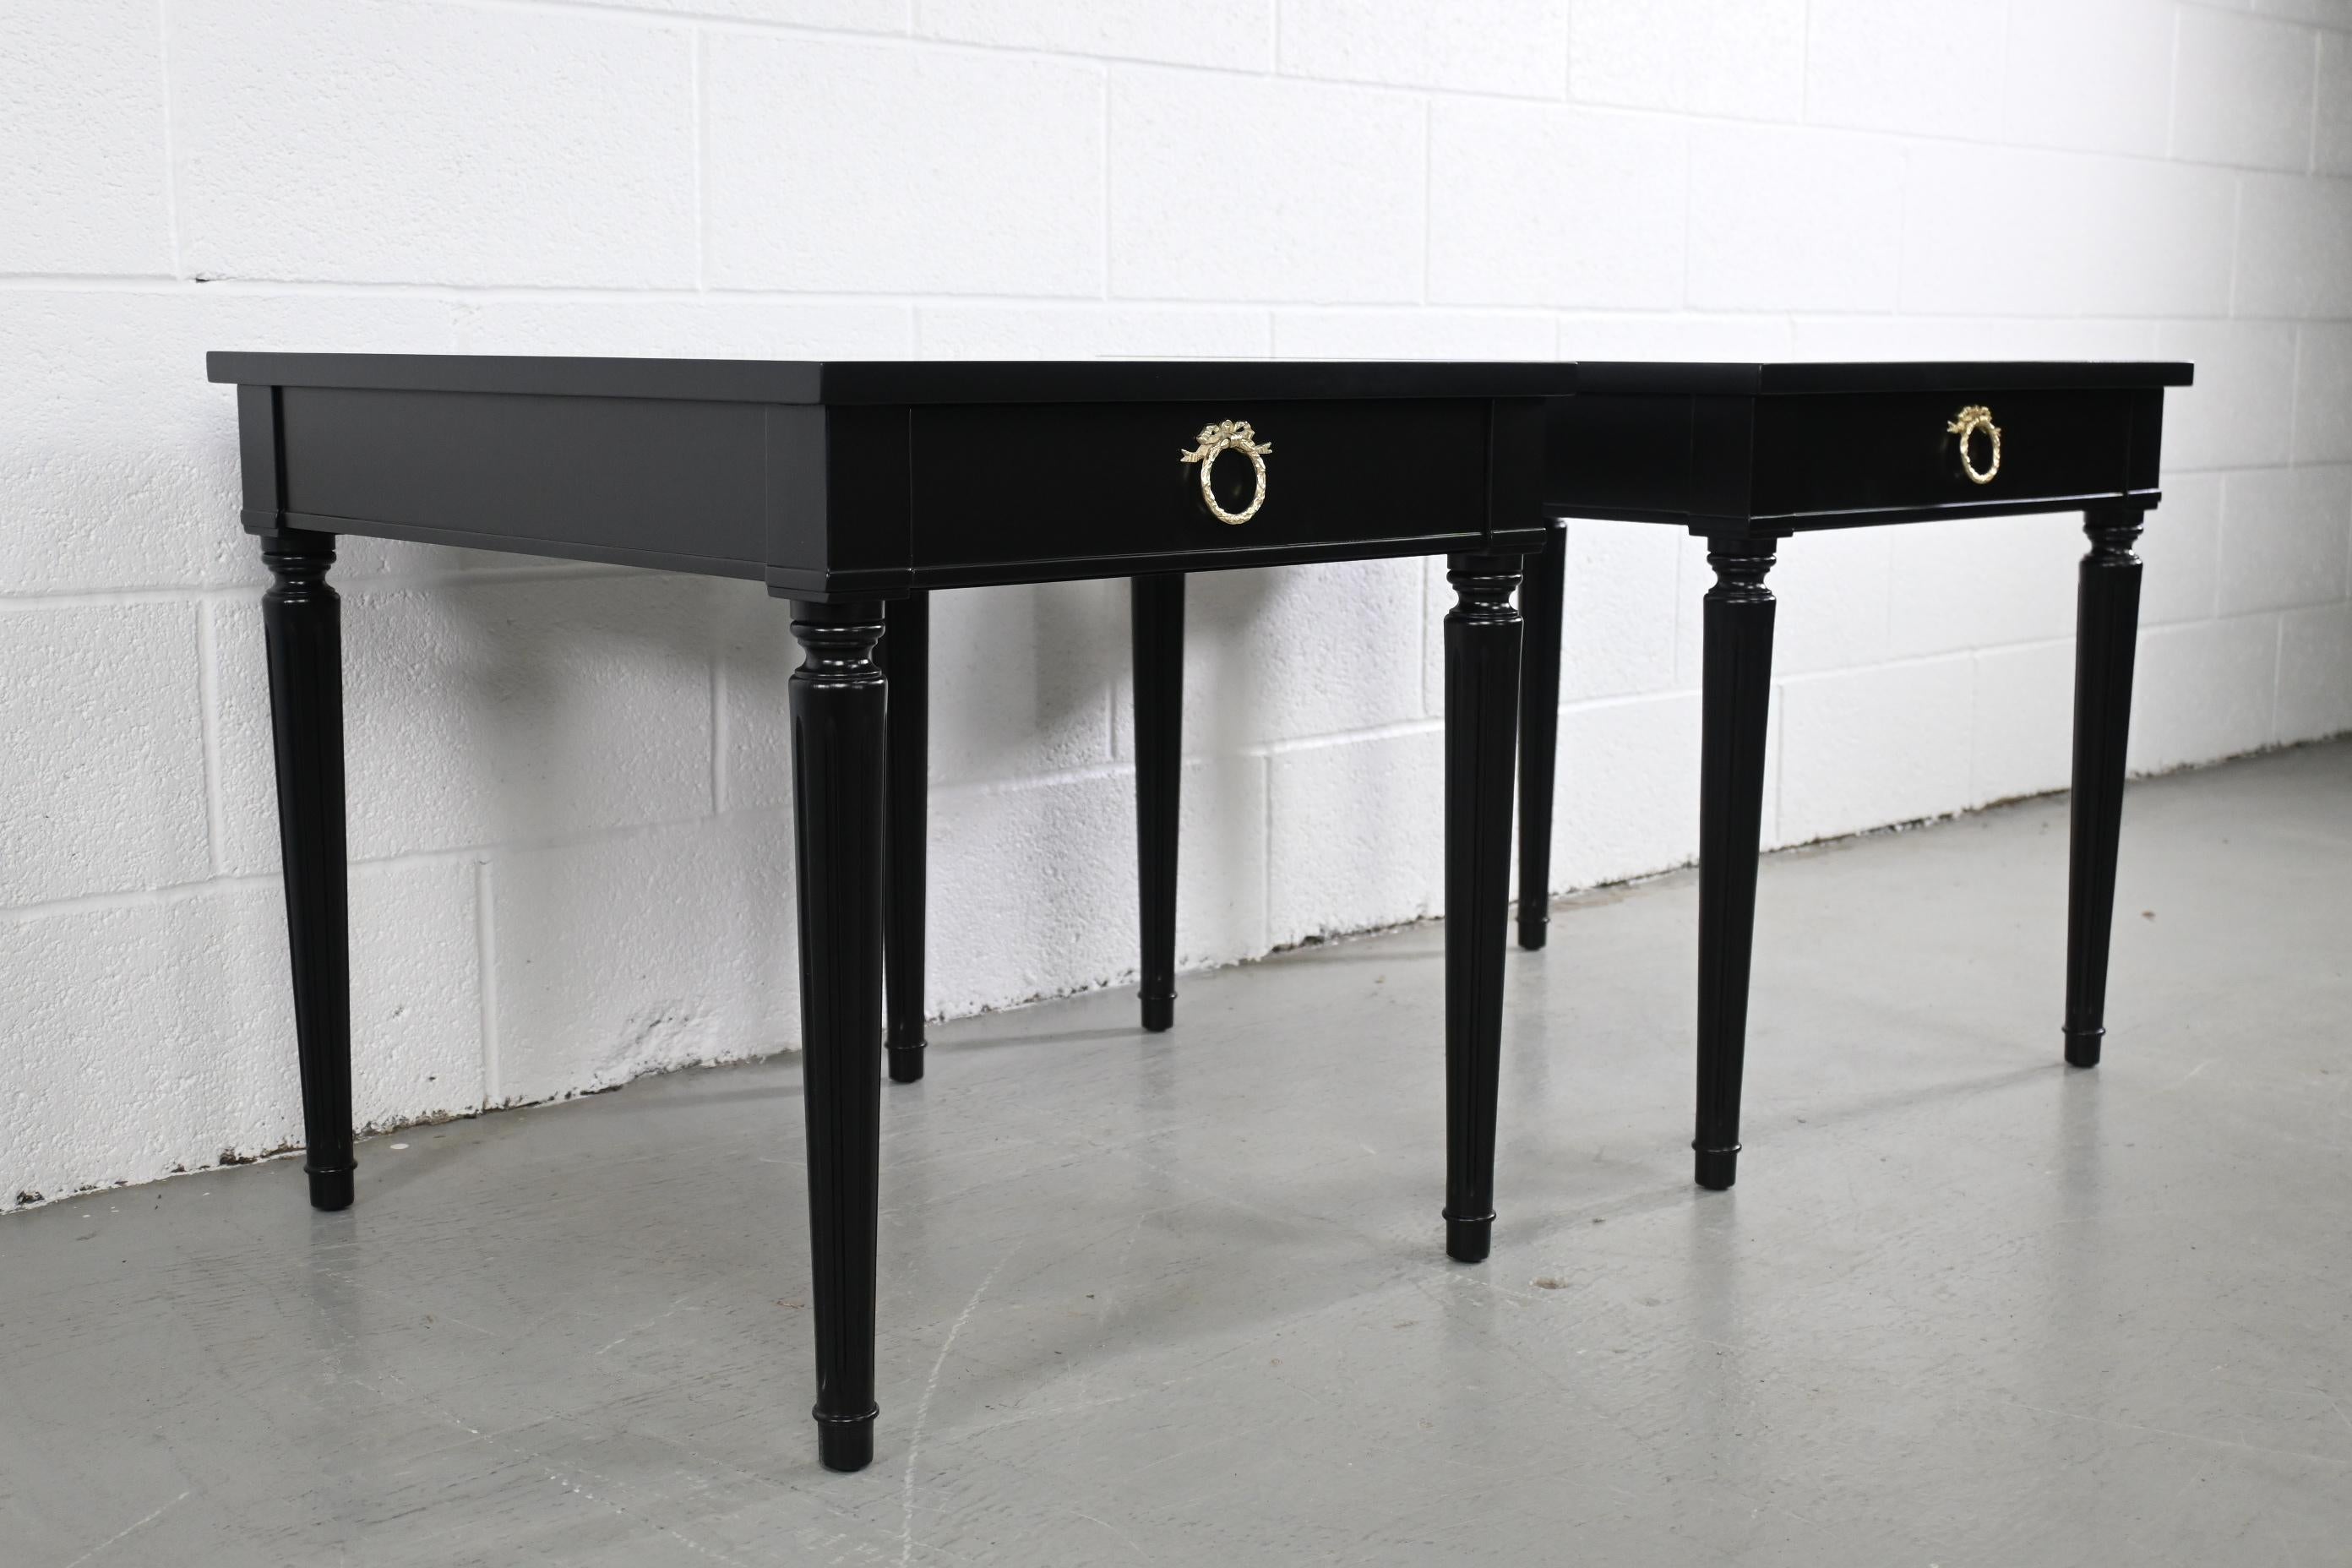 Kindel Furniture French Regency style black lacquered pair of end or side tables

Kindel Furniture, USA, 1980s

22 Wide x 26 Deep x 22.25 High

Pair of French Regency style black lacquered end or side tables with brass